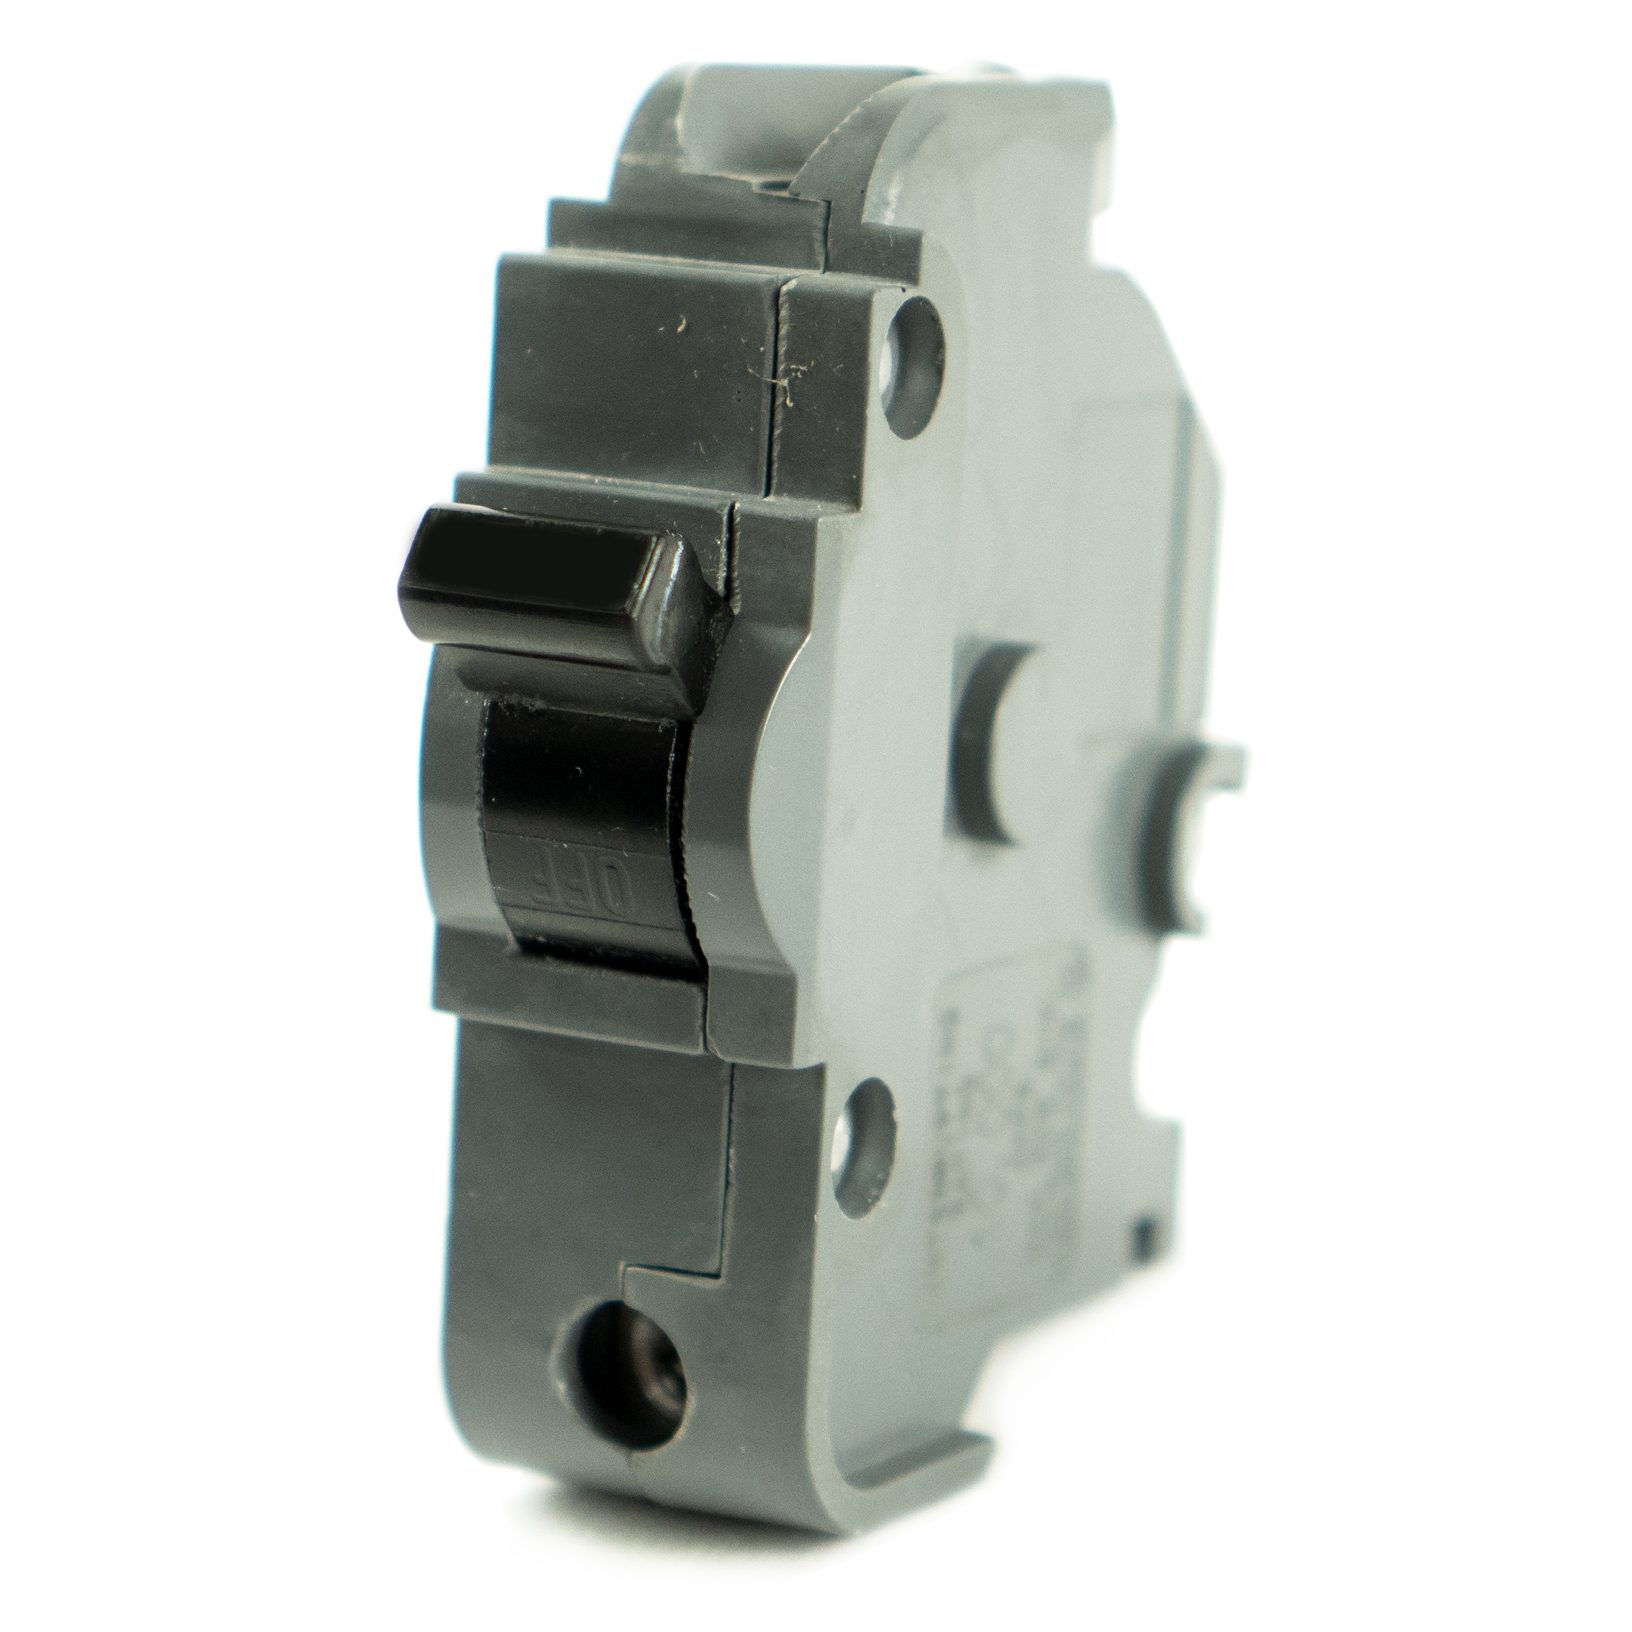 Connecticut Electric manufactures new high quality replacement circuit breakers for NBLP® load centers that accept NB style circuit breakers.  Circuit breakers should only be replaced with new tested and Safety Agency Listed circuit breakers, never used or refurbished ones. ETL Listed. 10,000 AIC. 1-Pole, 30 amp.